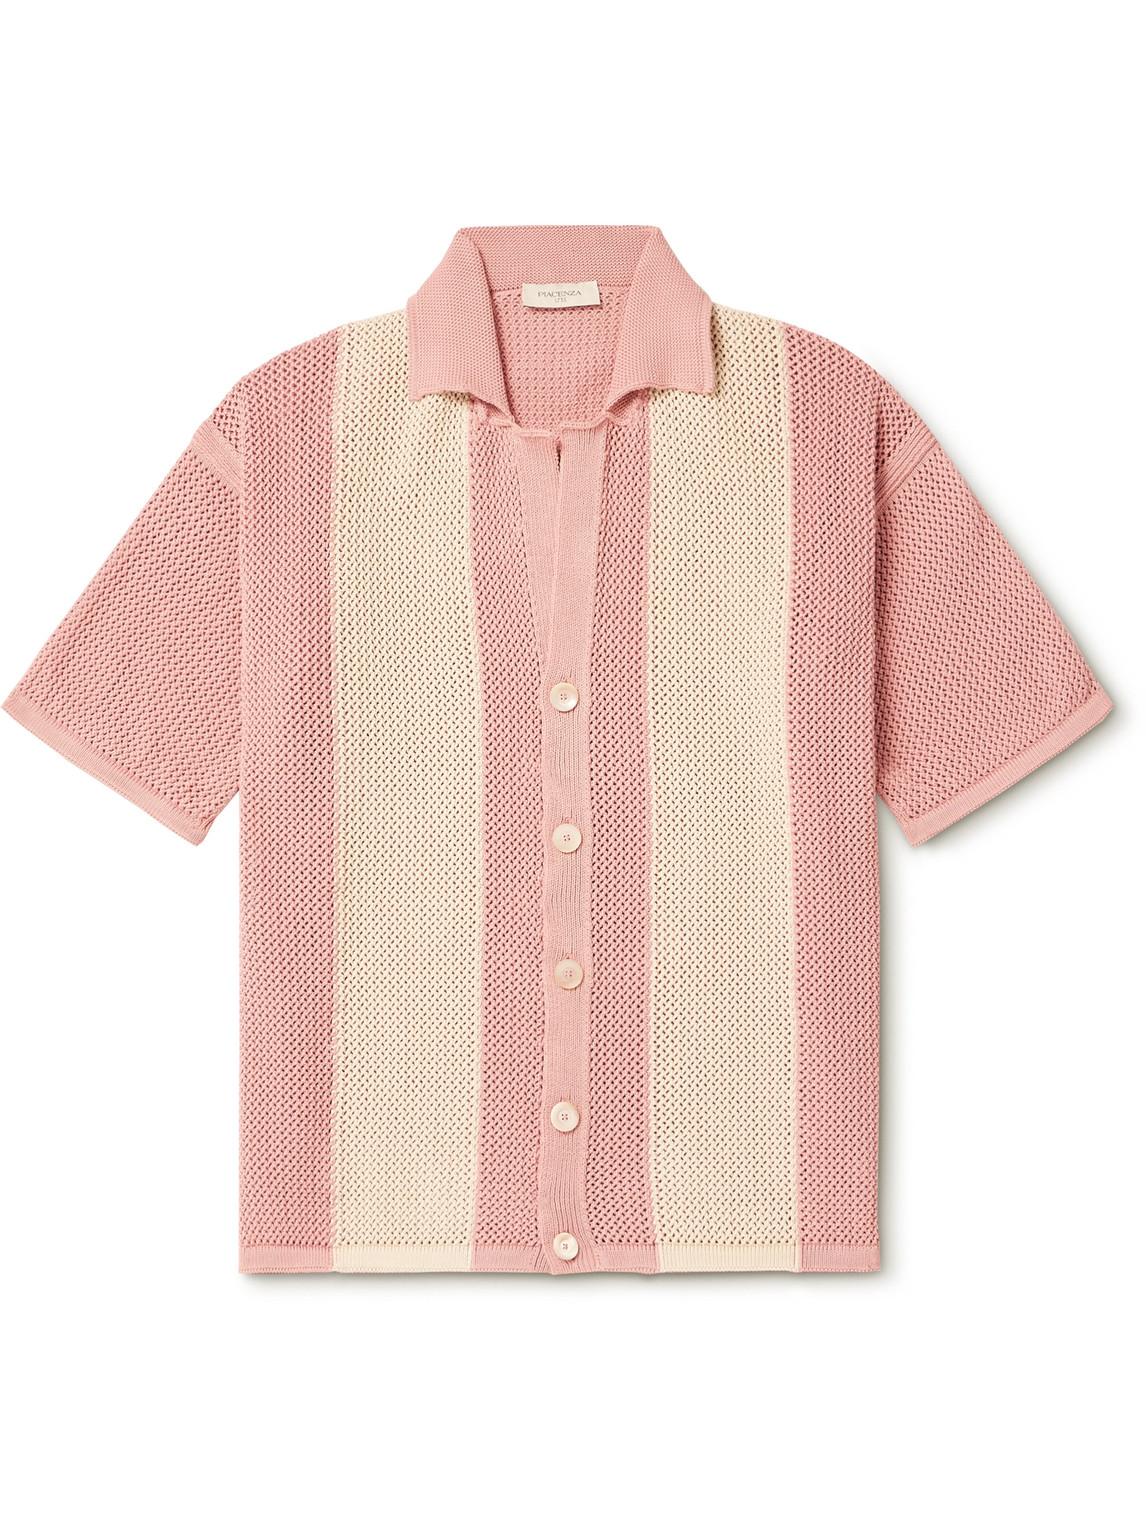 Piacenza Cashmere Striped Crochet-knit Cotton Shirt in Pink for Men | Lyst